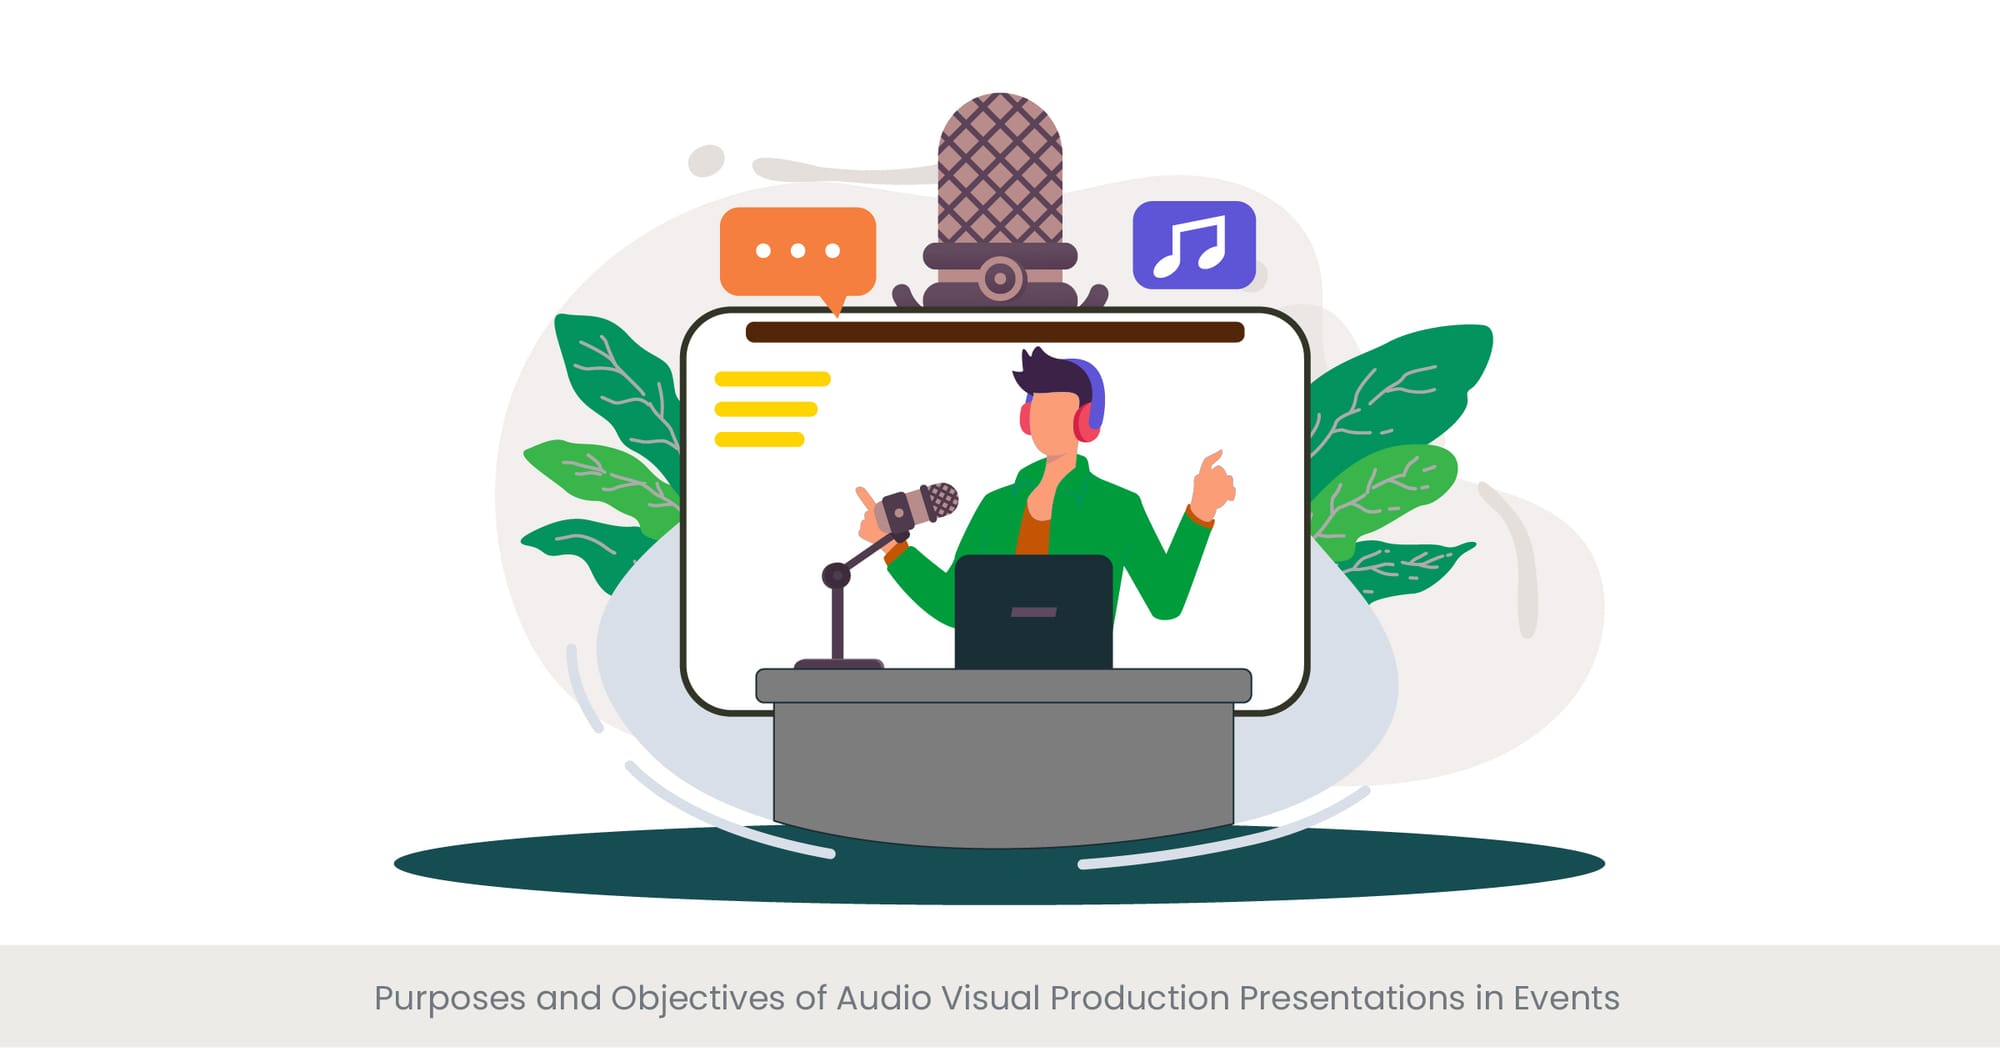 Purposes and Objectives of Audio Visual Production Presentations in Events